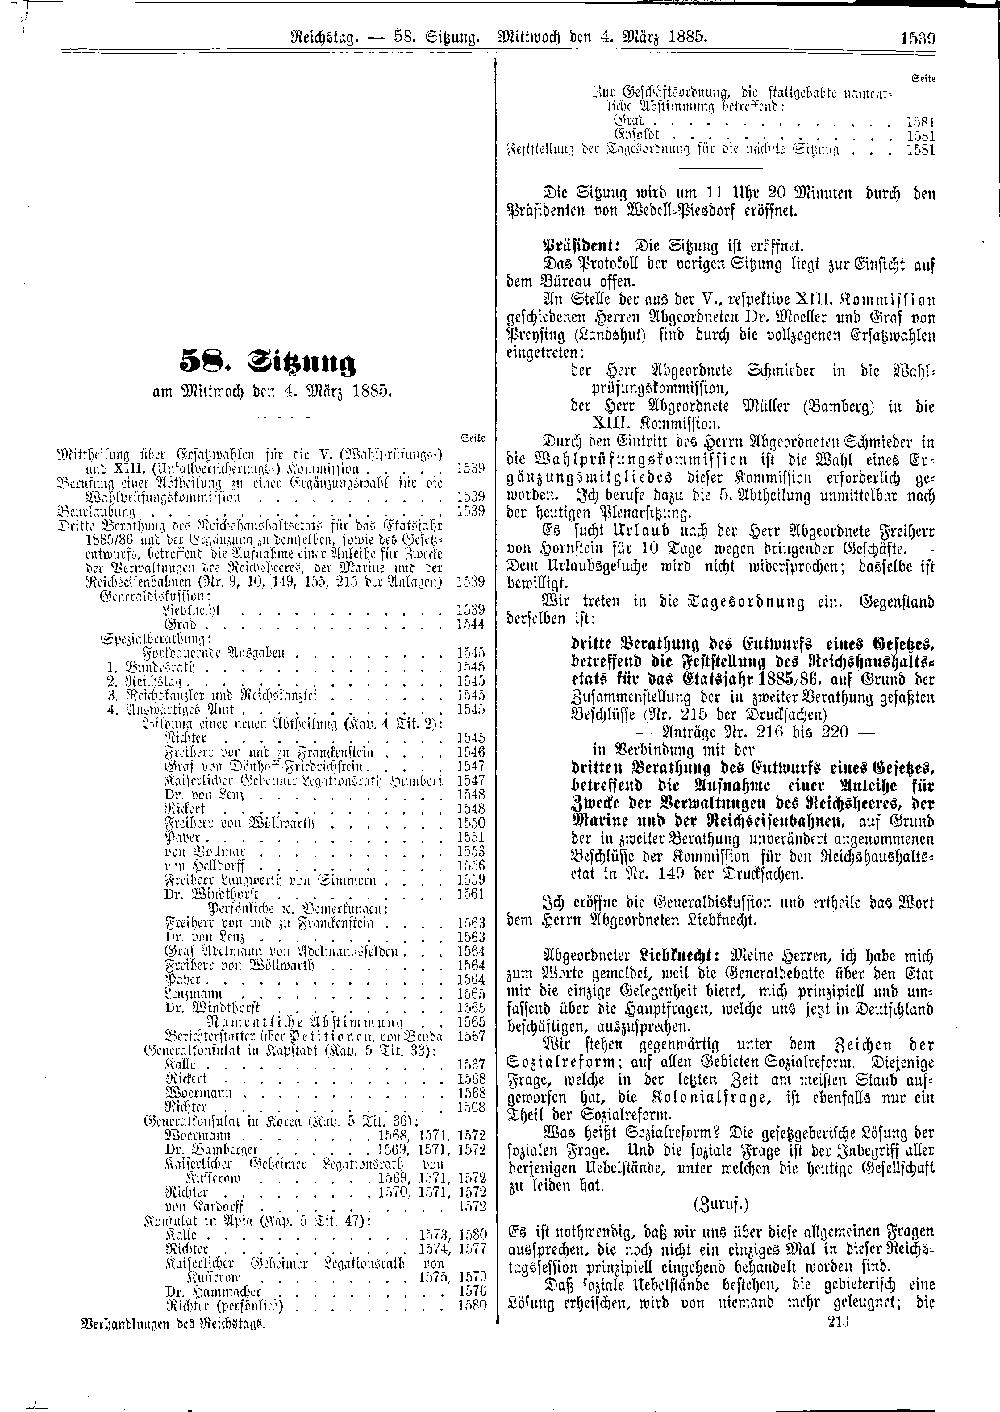 Scan of page 1539